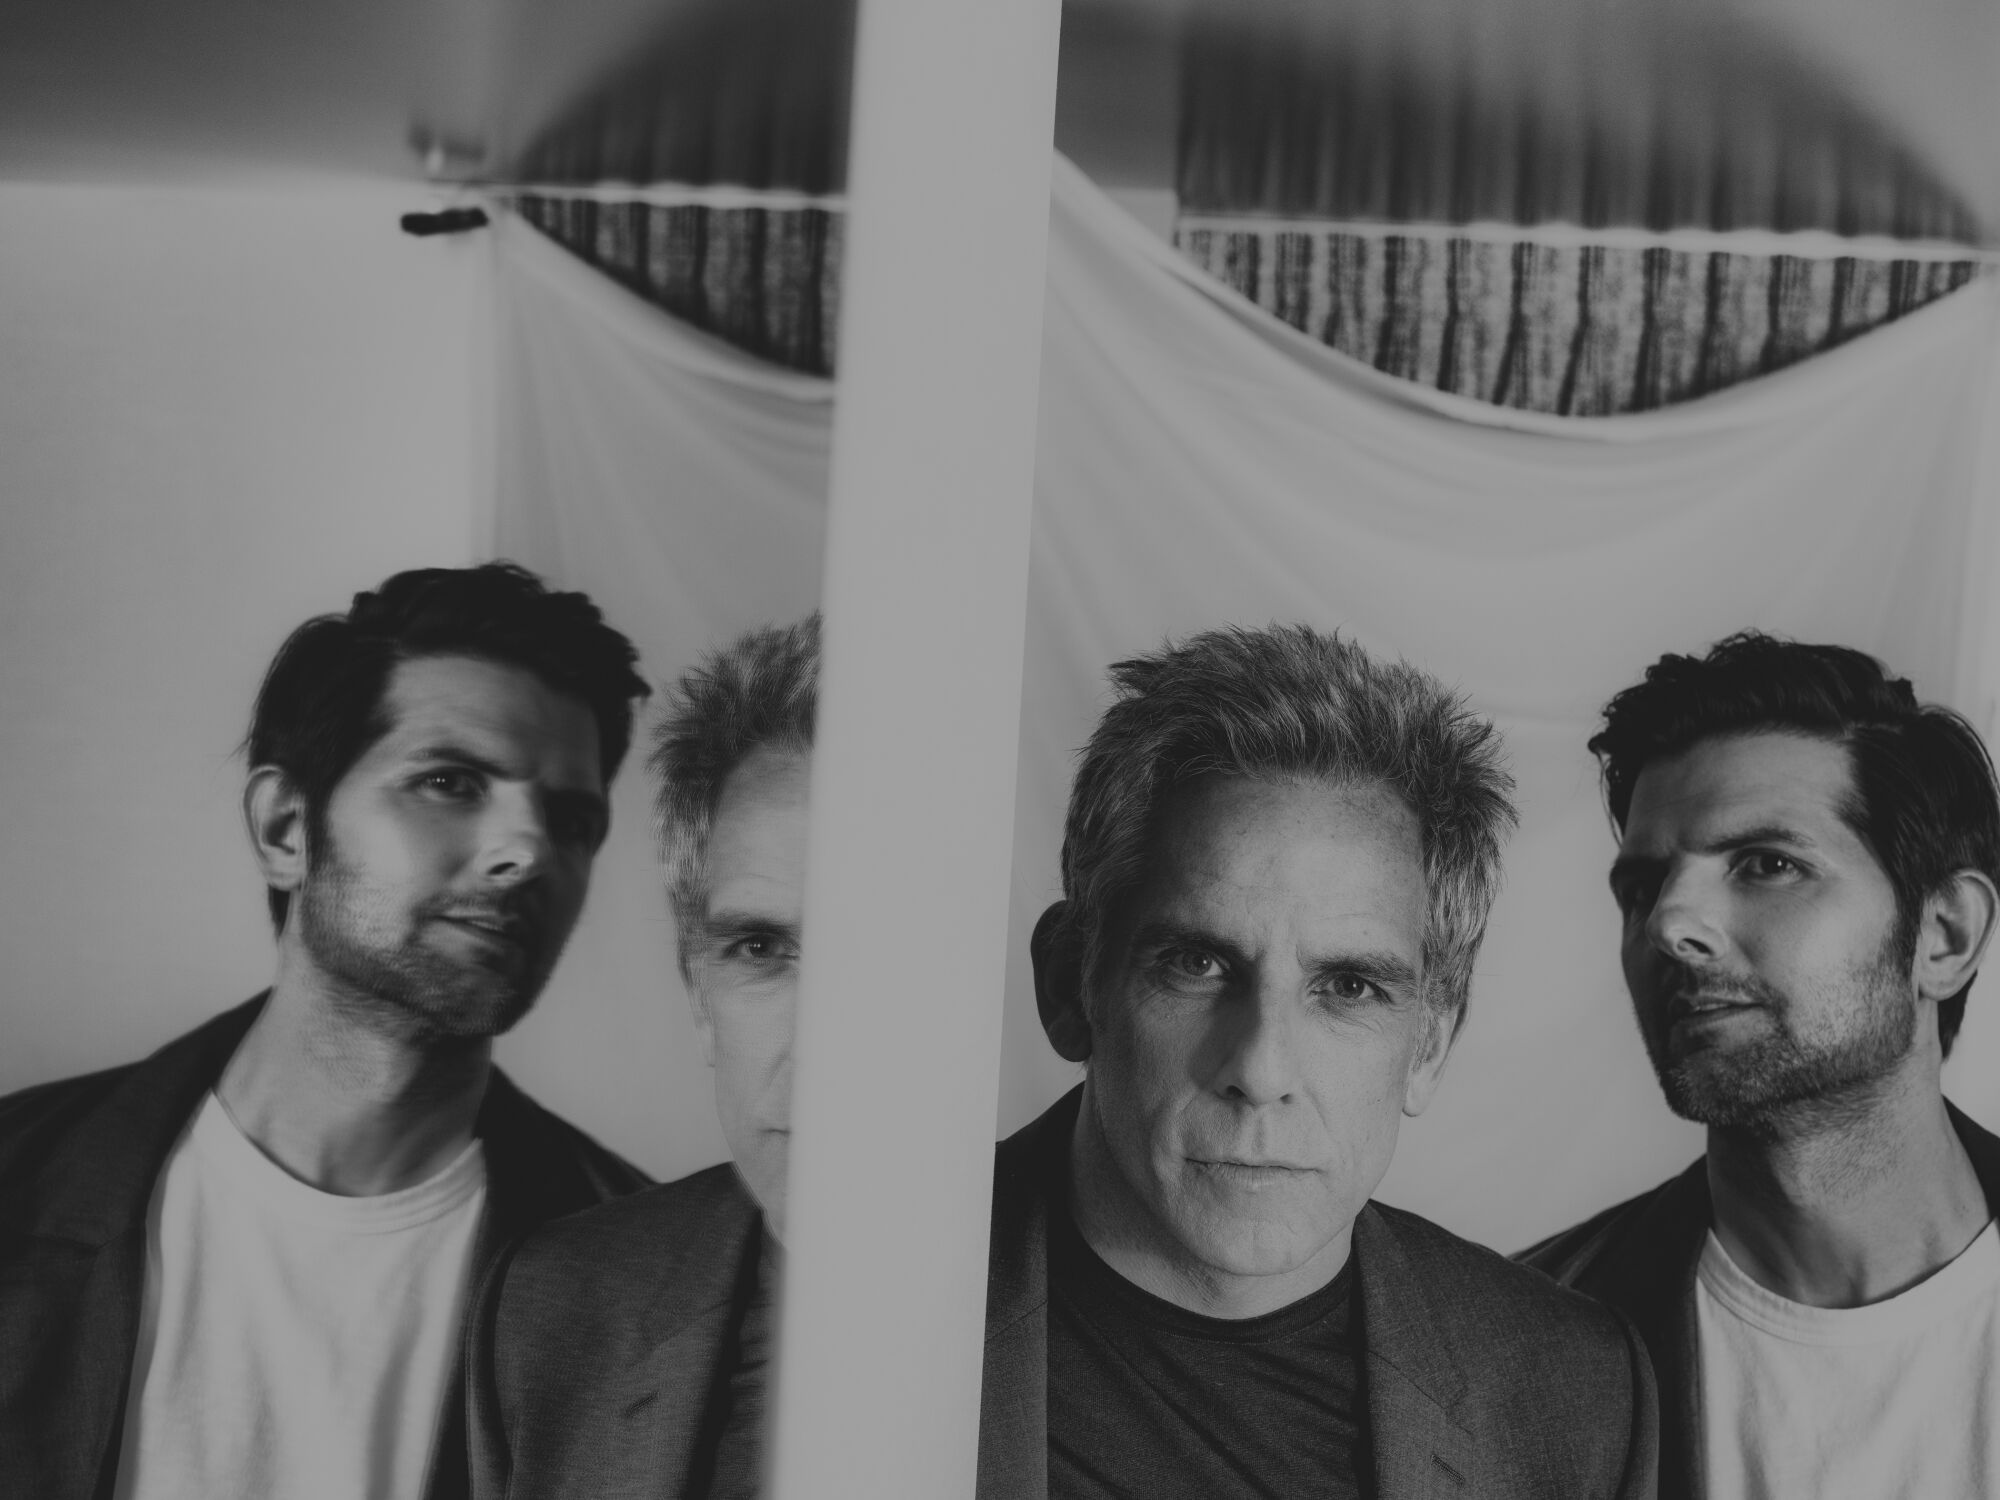 Portrait of Ben Stiller and Adam Scott at the London Hotel for "Severence," which Stiller directs and Scott stars. I